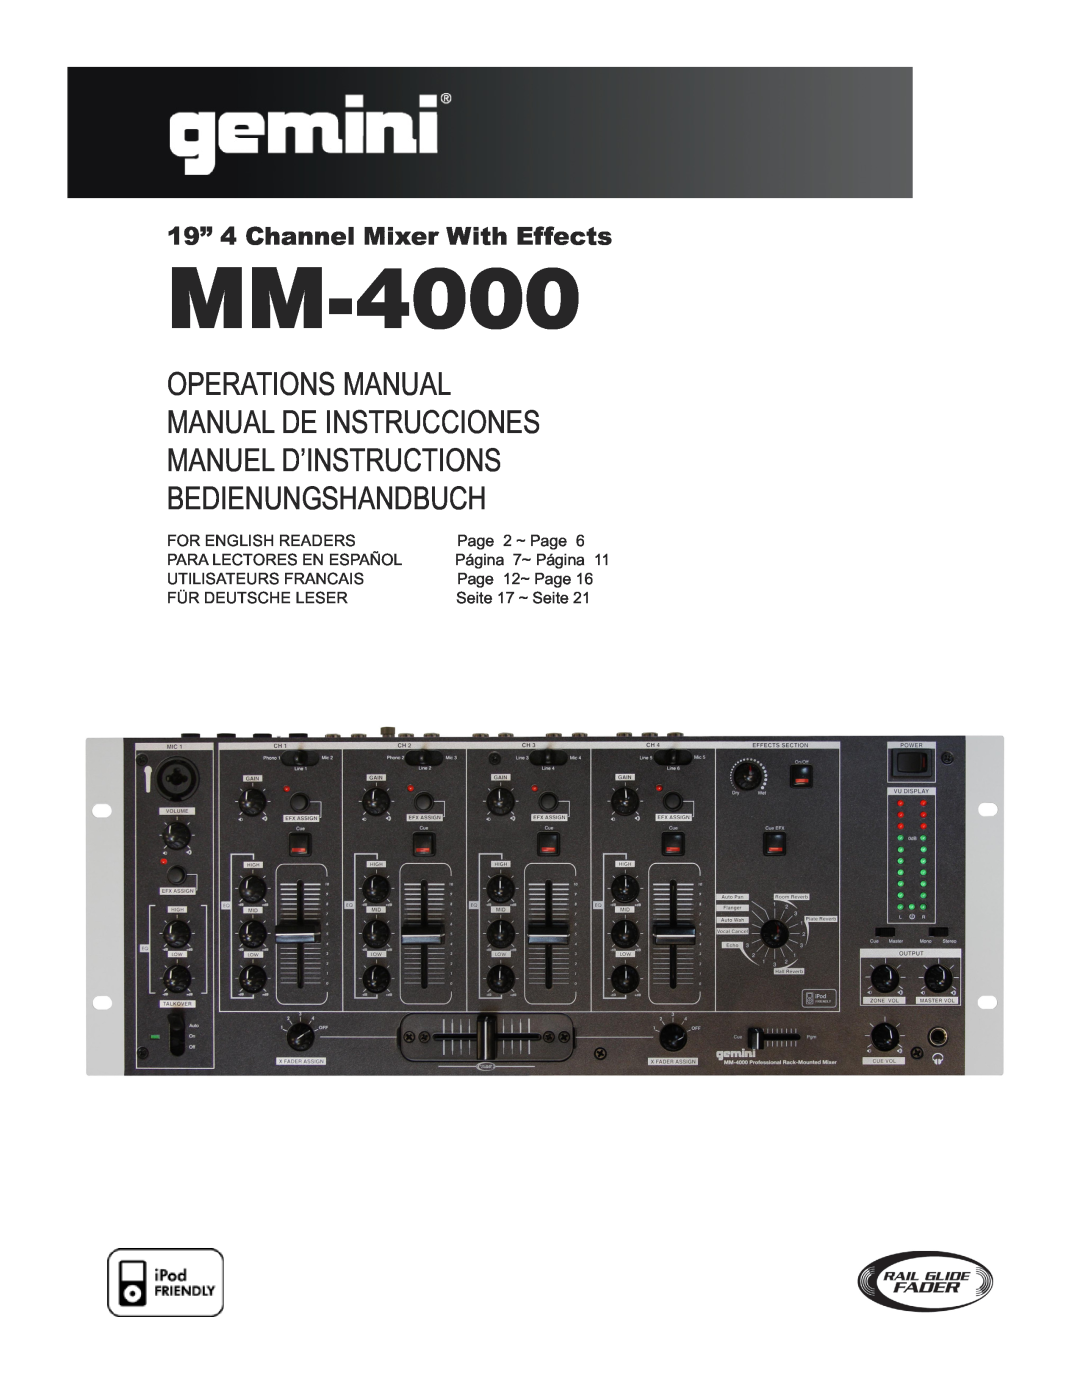 Gemini MM-4000 manual 19” 4 Channel Mixer With Effects 